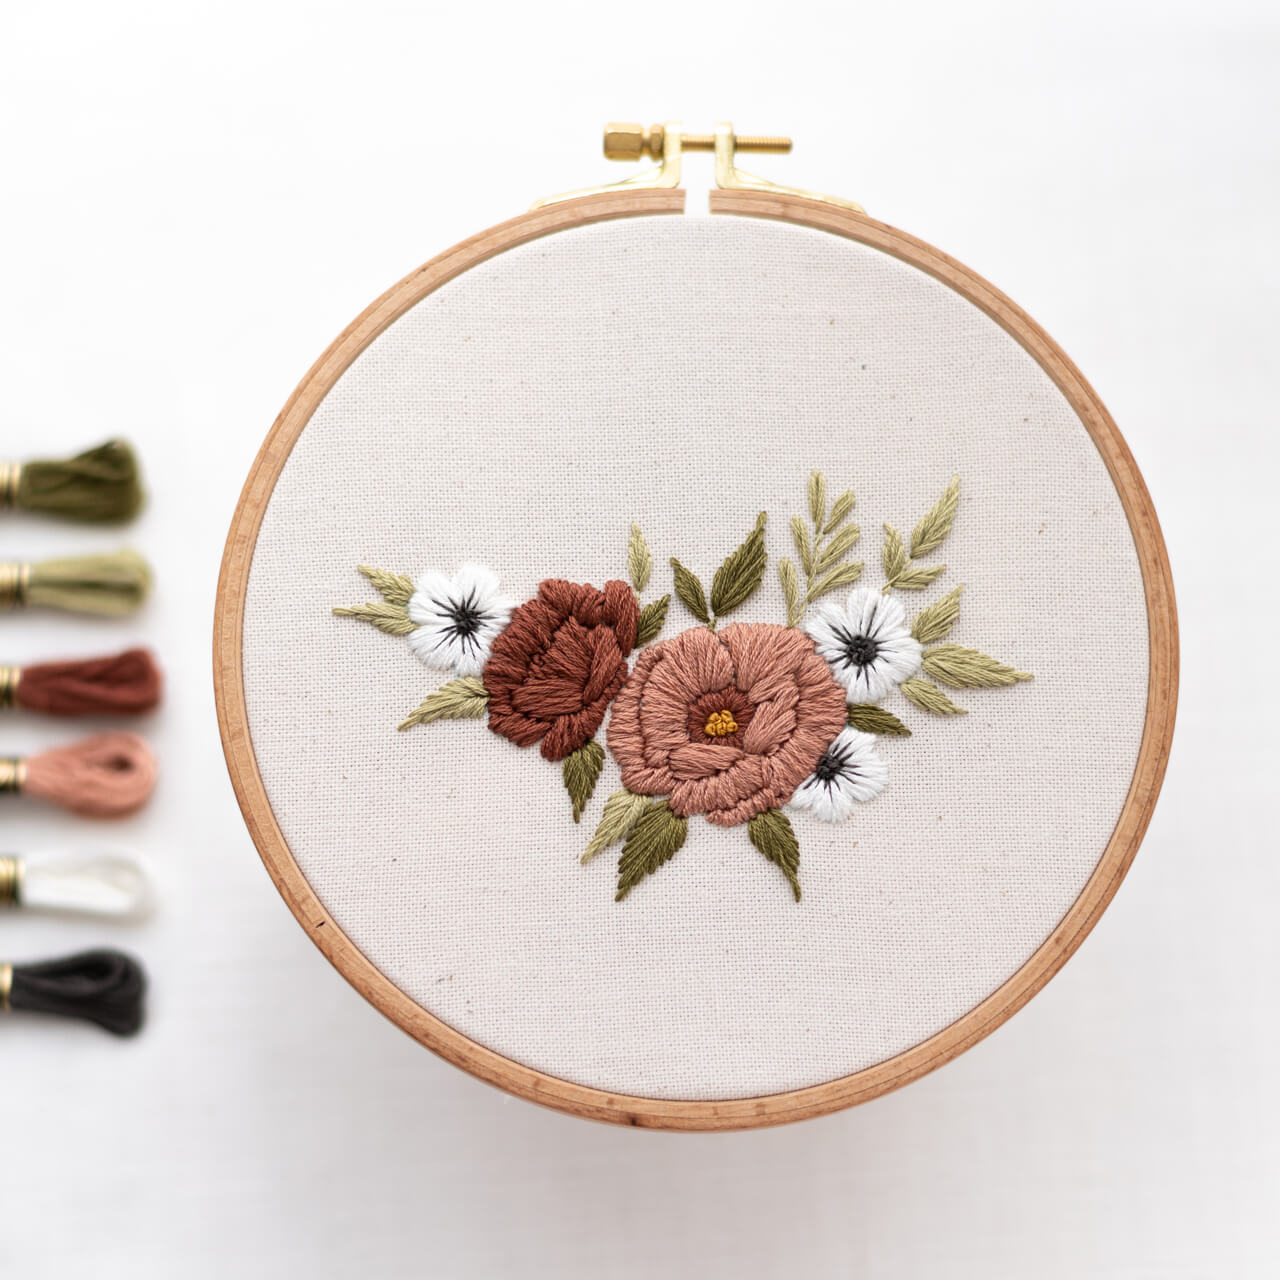 Wild Roses • Embroidery Pattern